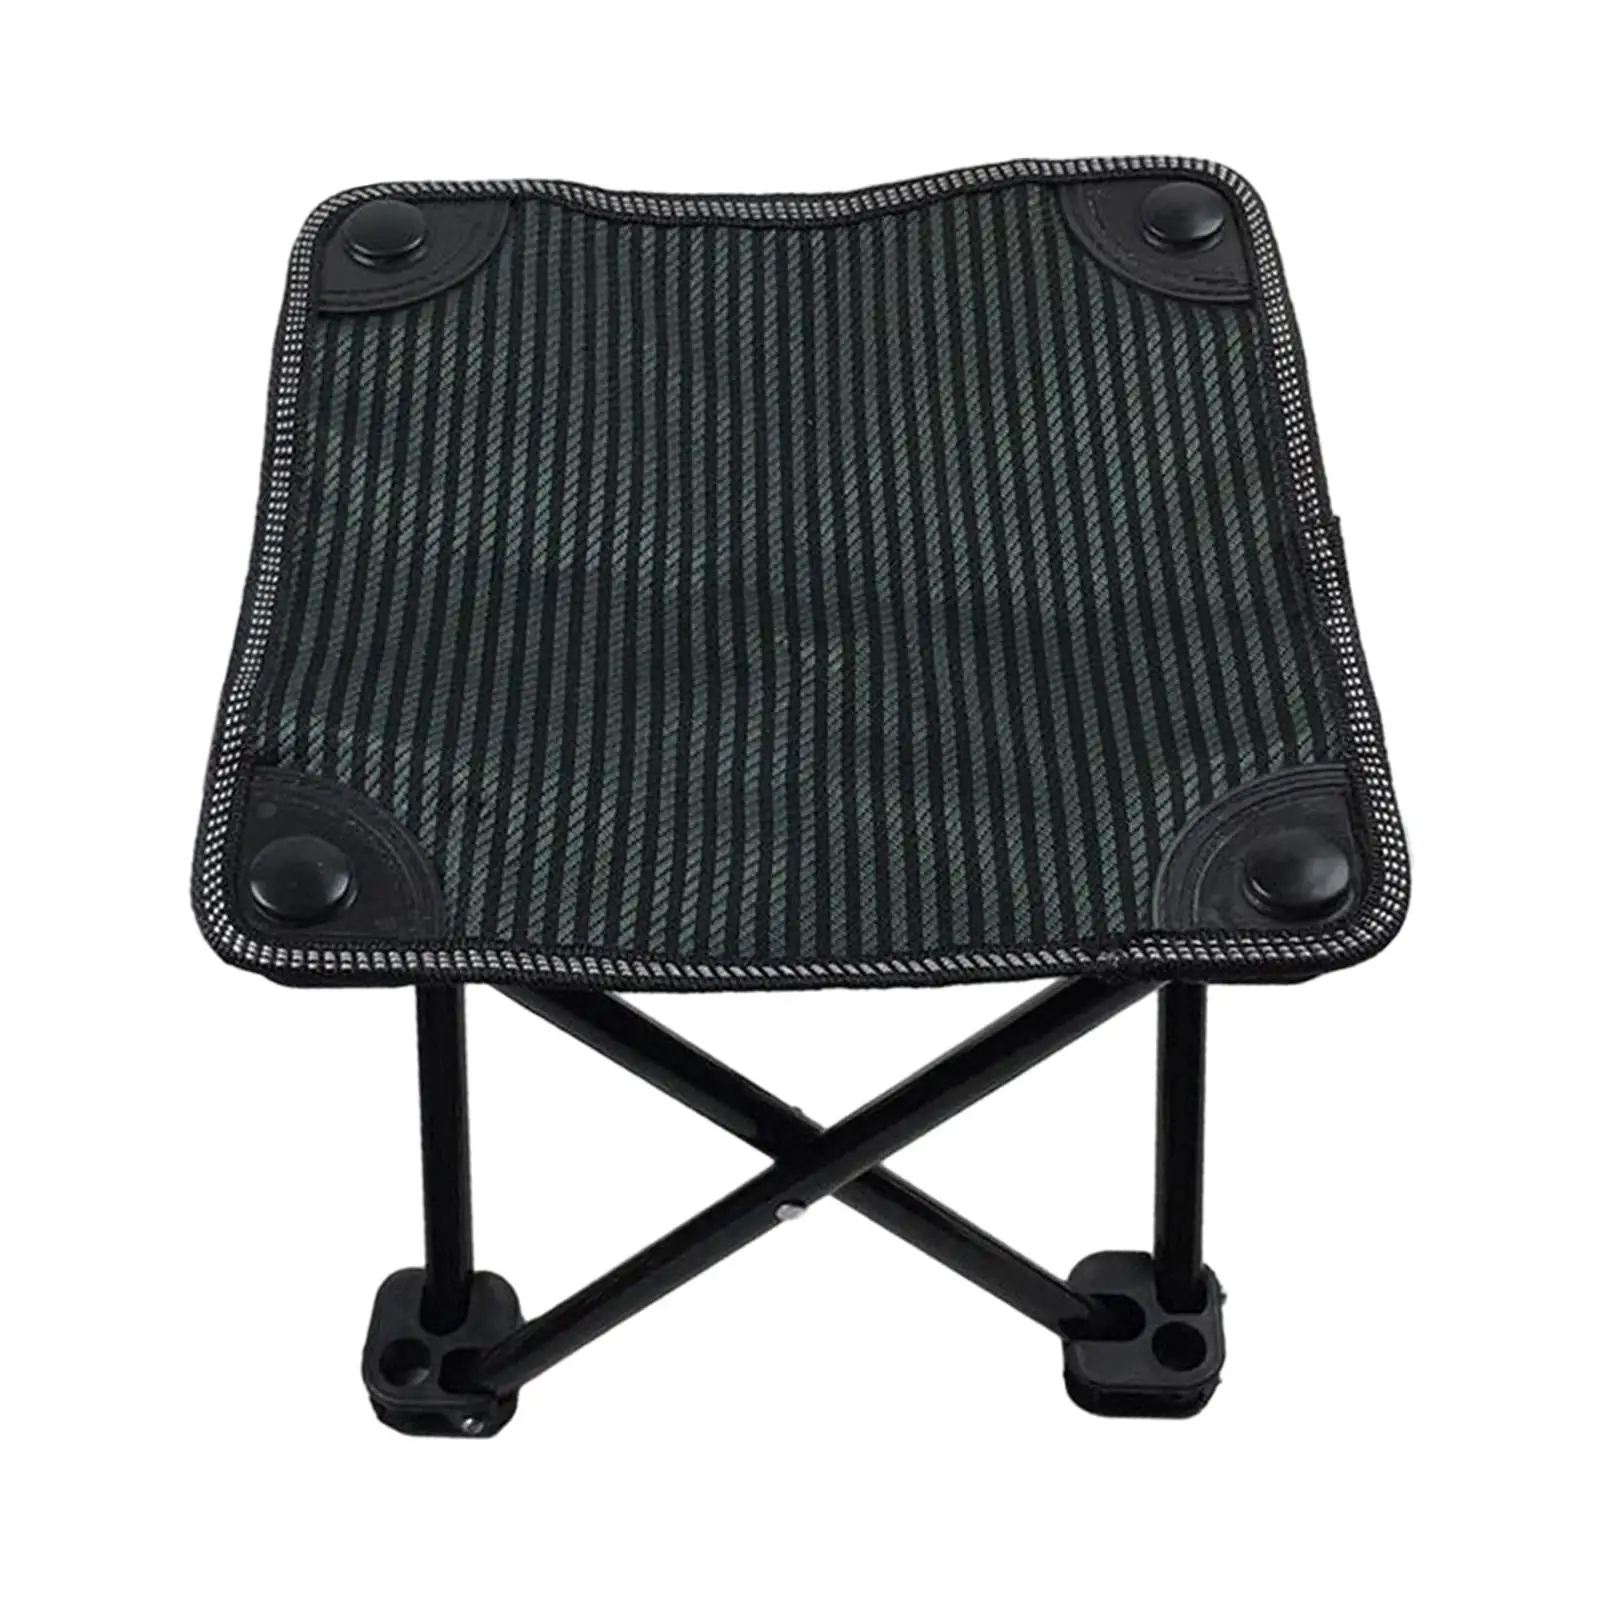 Camping Folding Stool Compact Footstool Foot Stool Fishing Chair Collapsible Stool for Outdoor Fishing Festival Barbecue Hiking